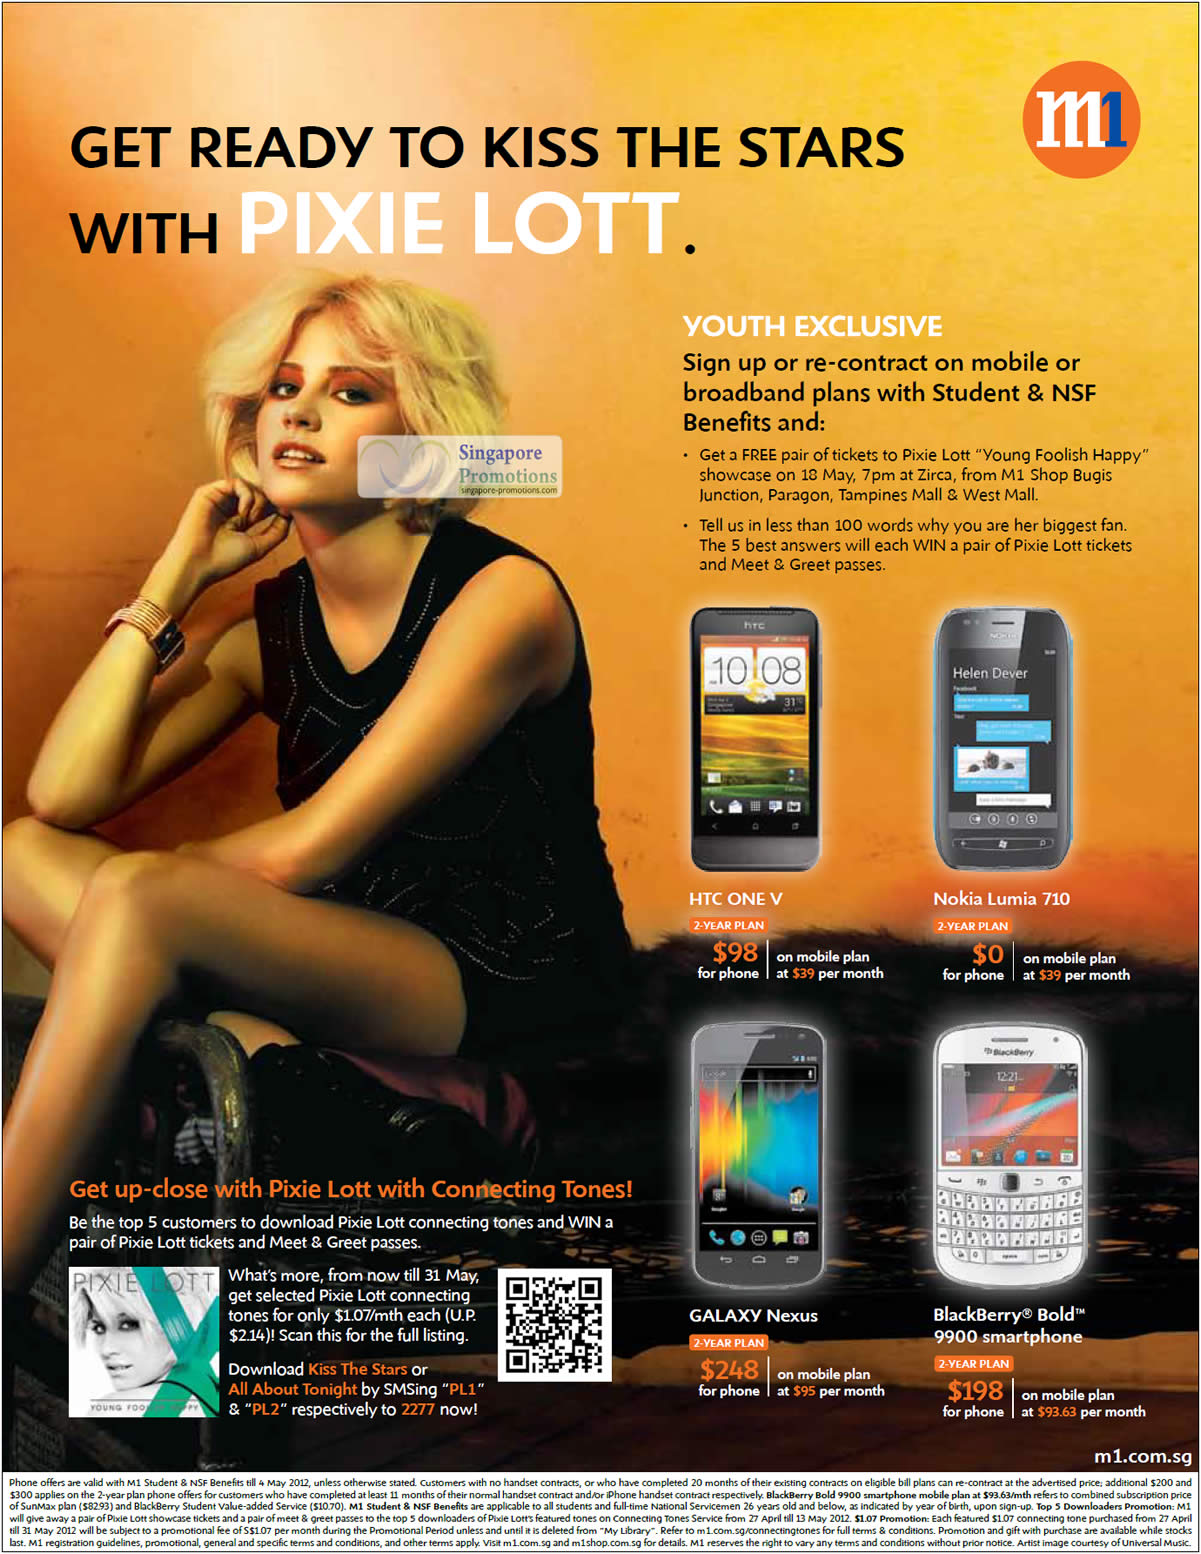 Featured image for M1 Smartphones, Tablets & Home/Mobile Broadband Offers 28 Apr - 4 May 2012